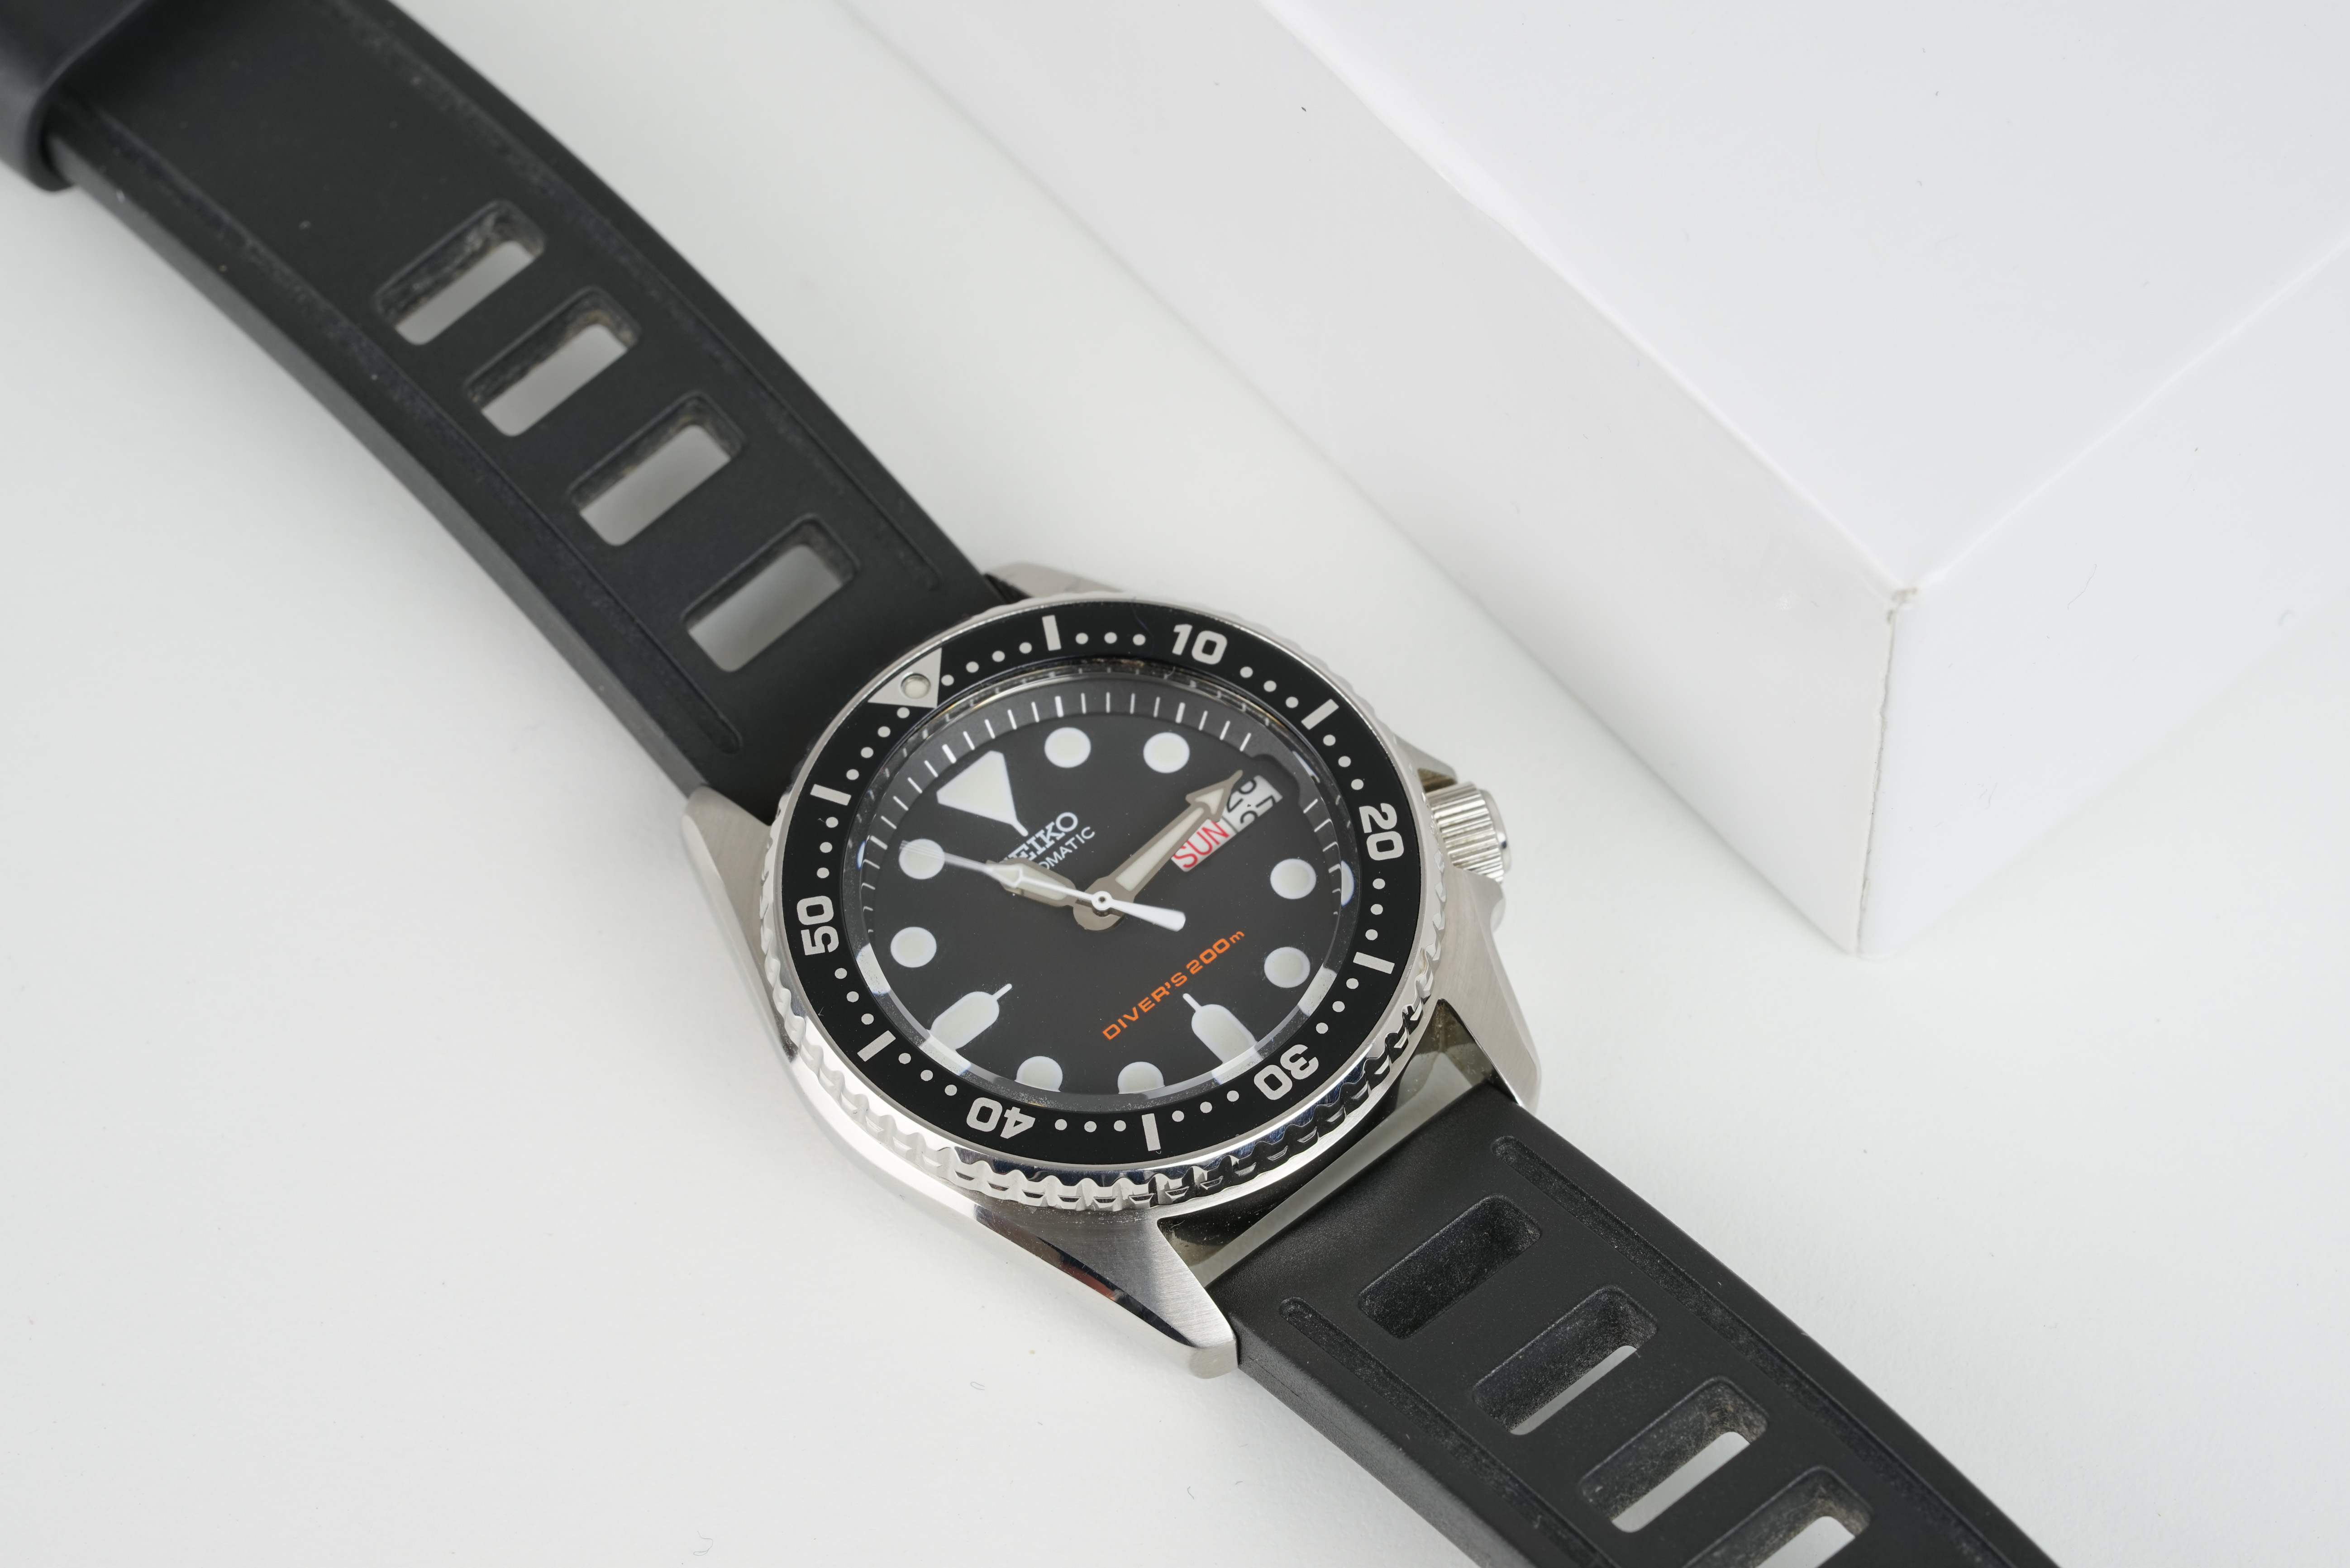 MID SIZE SEIKO DIVERS AUTOMATIC WRISTWATCH W/ BOX, circular black dial with hands, 38mm stainless